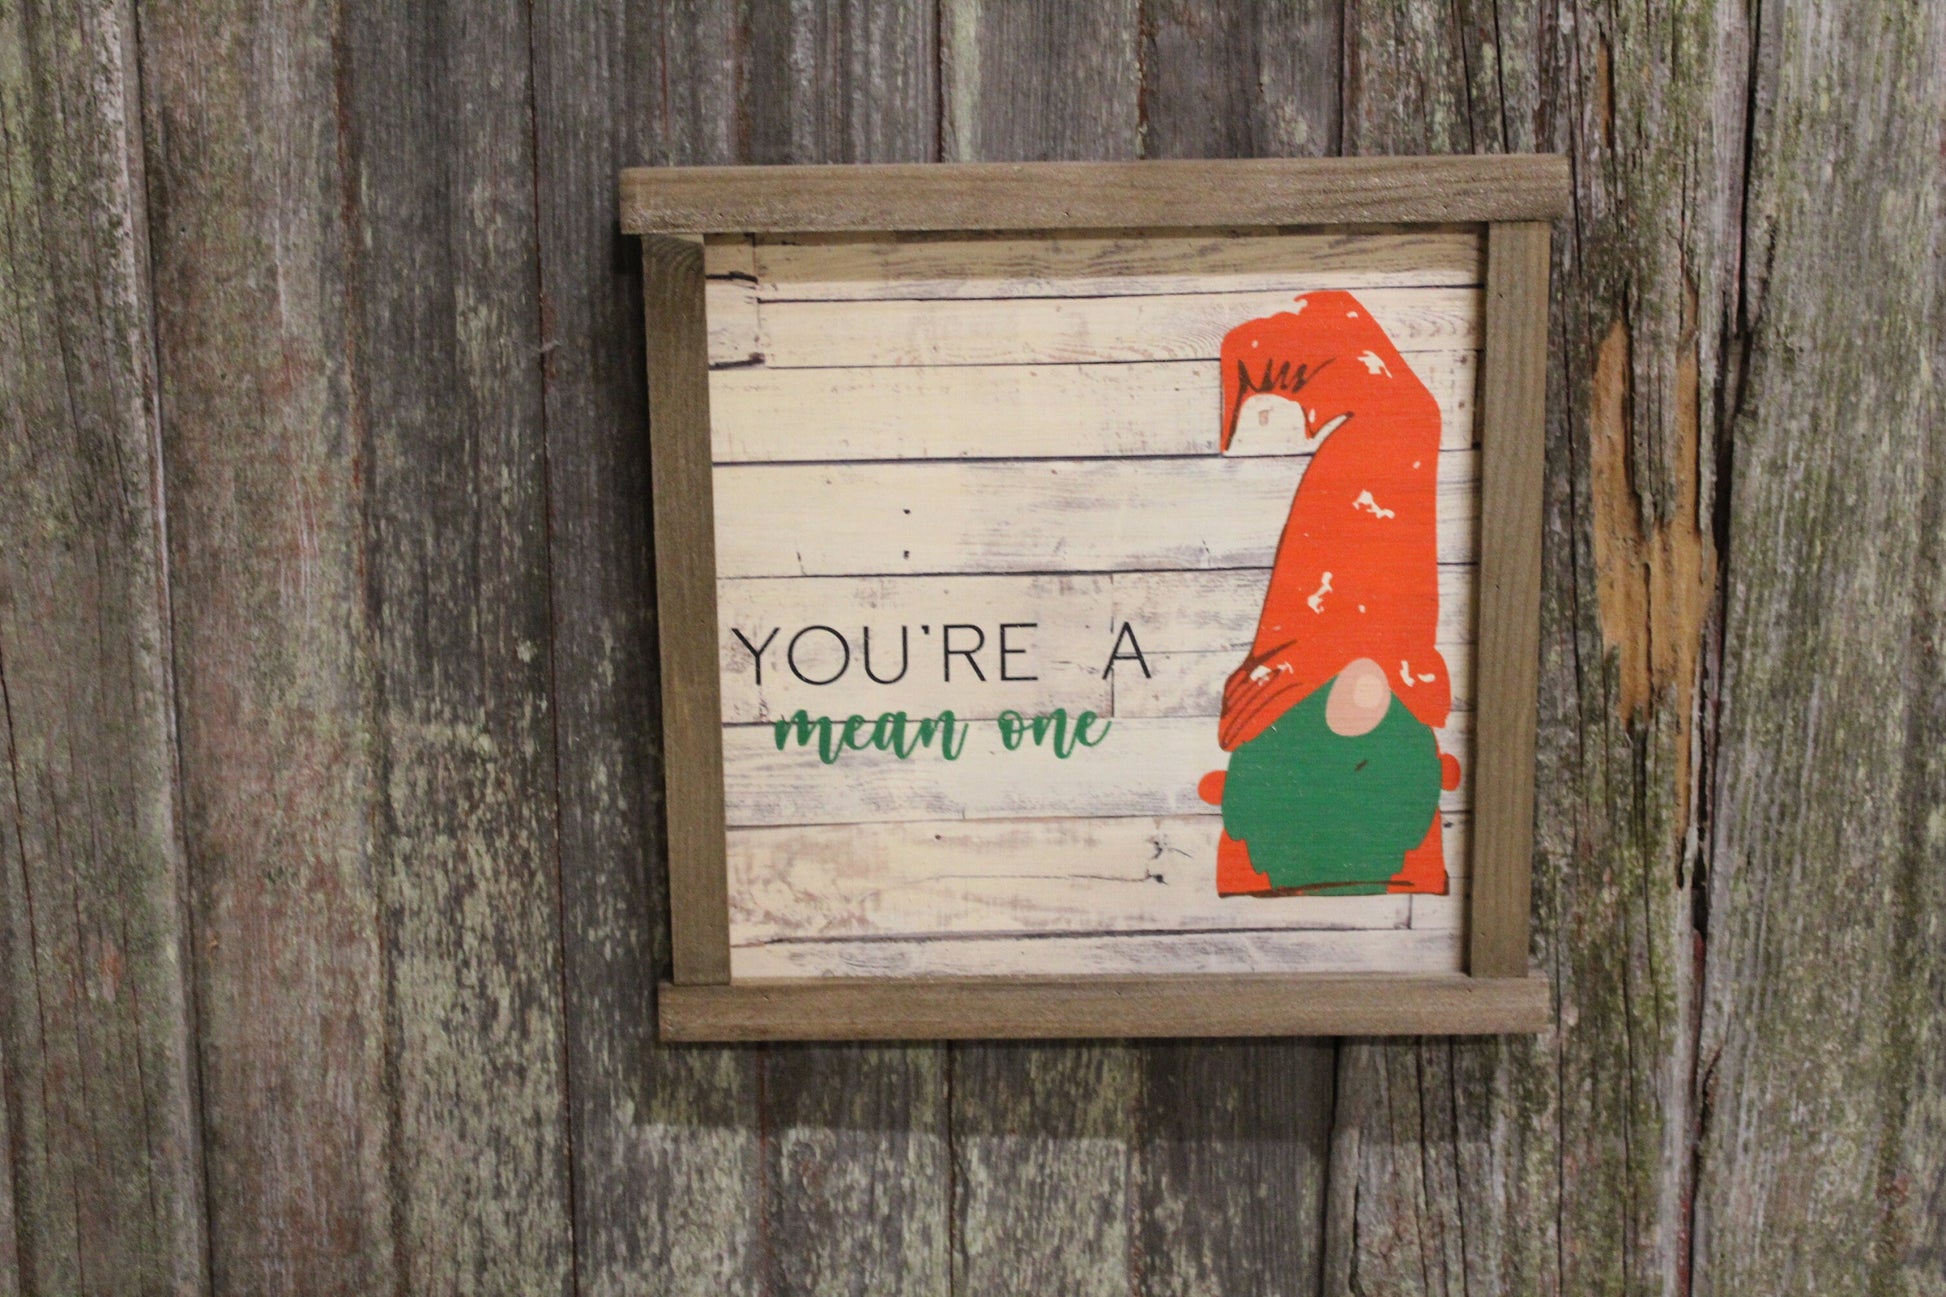 Gnome Your A Mean One Wood Sign Elf Green Beard Cute Funny Christmas Decoration Farmhouse Décor Framed Rustic Primitive Printed